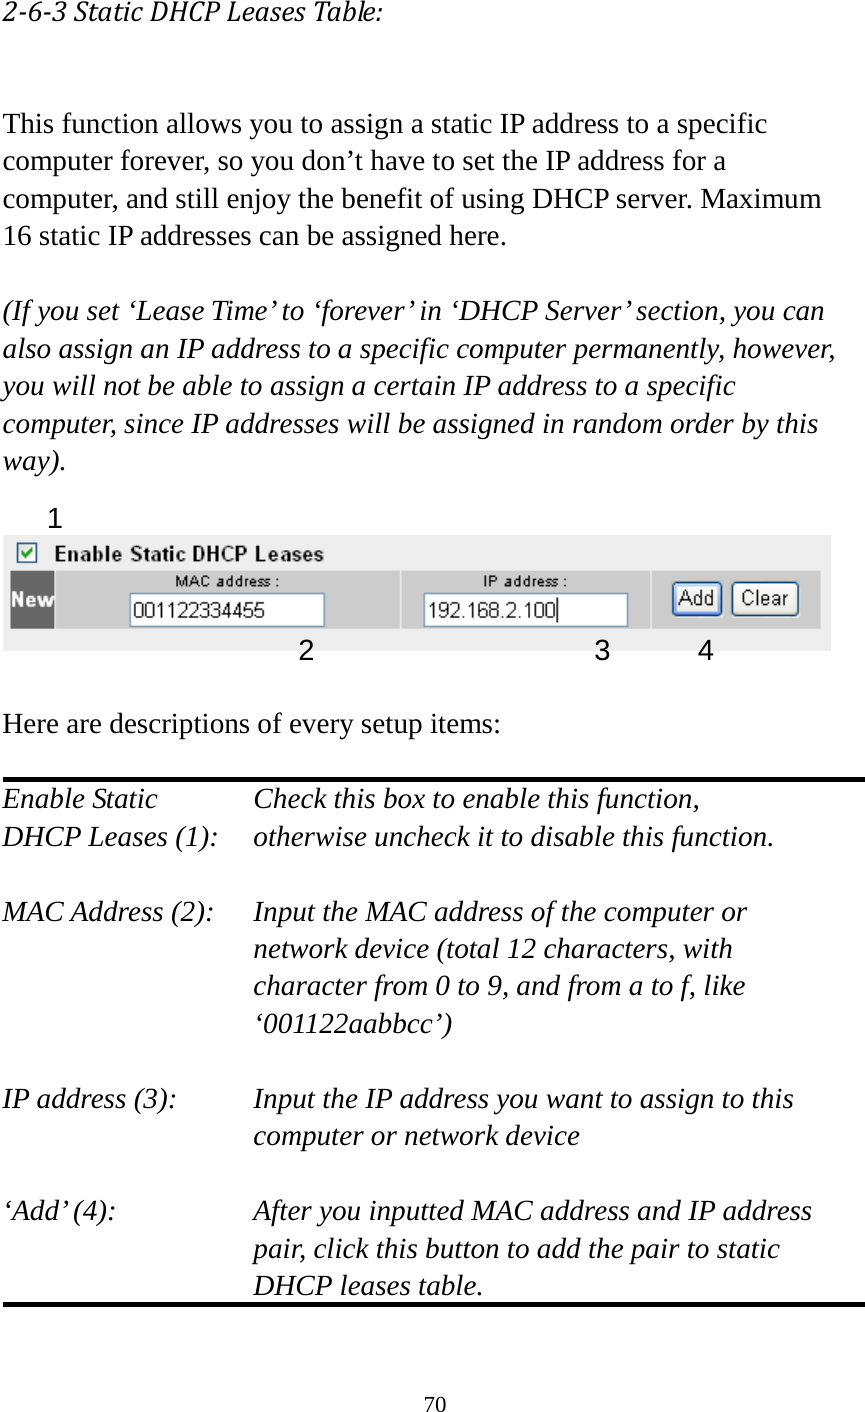 70  2-6-3 Static DHCP Leases Table:  This function allows you to assign a static IP address to a specific computer forever, so you don’t have to set the IP address for a computer, and still enjoy the benefit of using DHCP server. Maximum 16 static IP addresses can be assigned here.  (If you set ‘Lease Time’ to ‘forever’ in ‘DHCP Server’ section, you can also assign an IP address to a specific computer permanently, however, you will not be able to assign a certain IP address to a specific computer, since IP addresses will be assigned in random order by this way).      Here are descriptions of every setup items:  Enable Static      Check this box to enable this function, DHCP Leases (1):   otherwise uncheck it to disable this function.  MAC Address (2):    Input the MAC address of the computer or network device (total 12 characters, with character from 0 to 9, and from a to f, like ‘001122aabbcc’)    IP address (3):   Input the IP address you want to assign to this computer or network device    ‘Add’ (4):    After you inputted MAC address and IP address pair, click this button to add the pair to static DHCP leases table.  1 2  3  4 